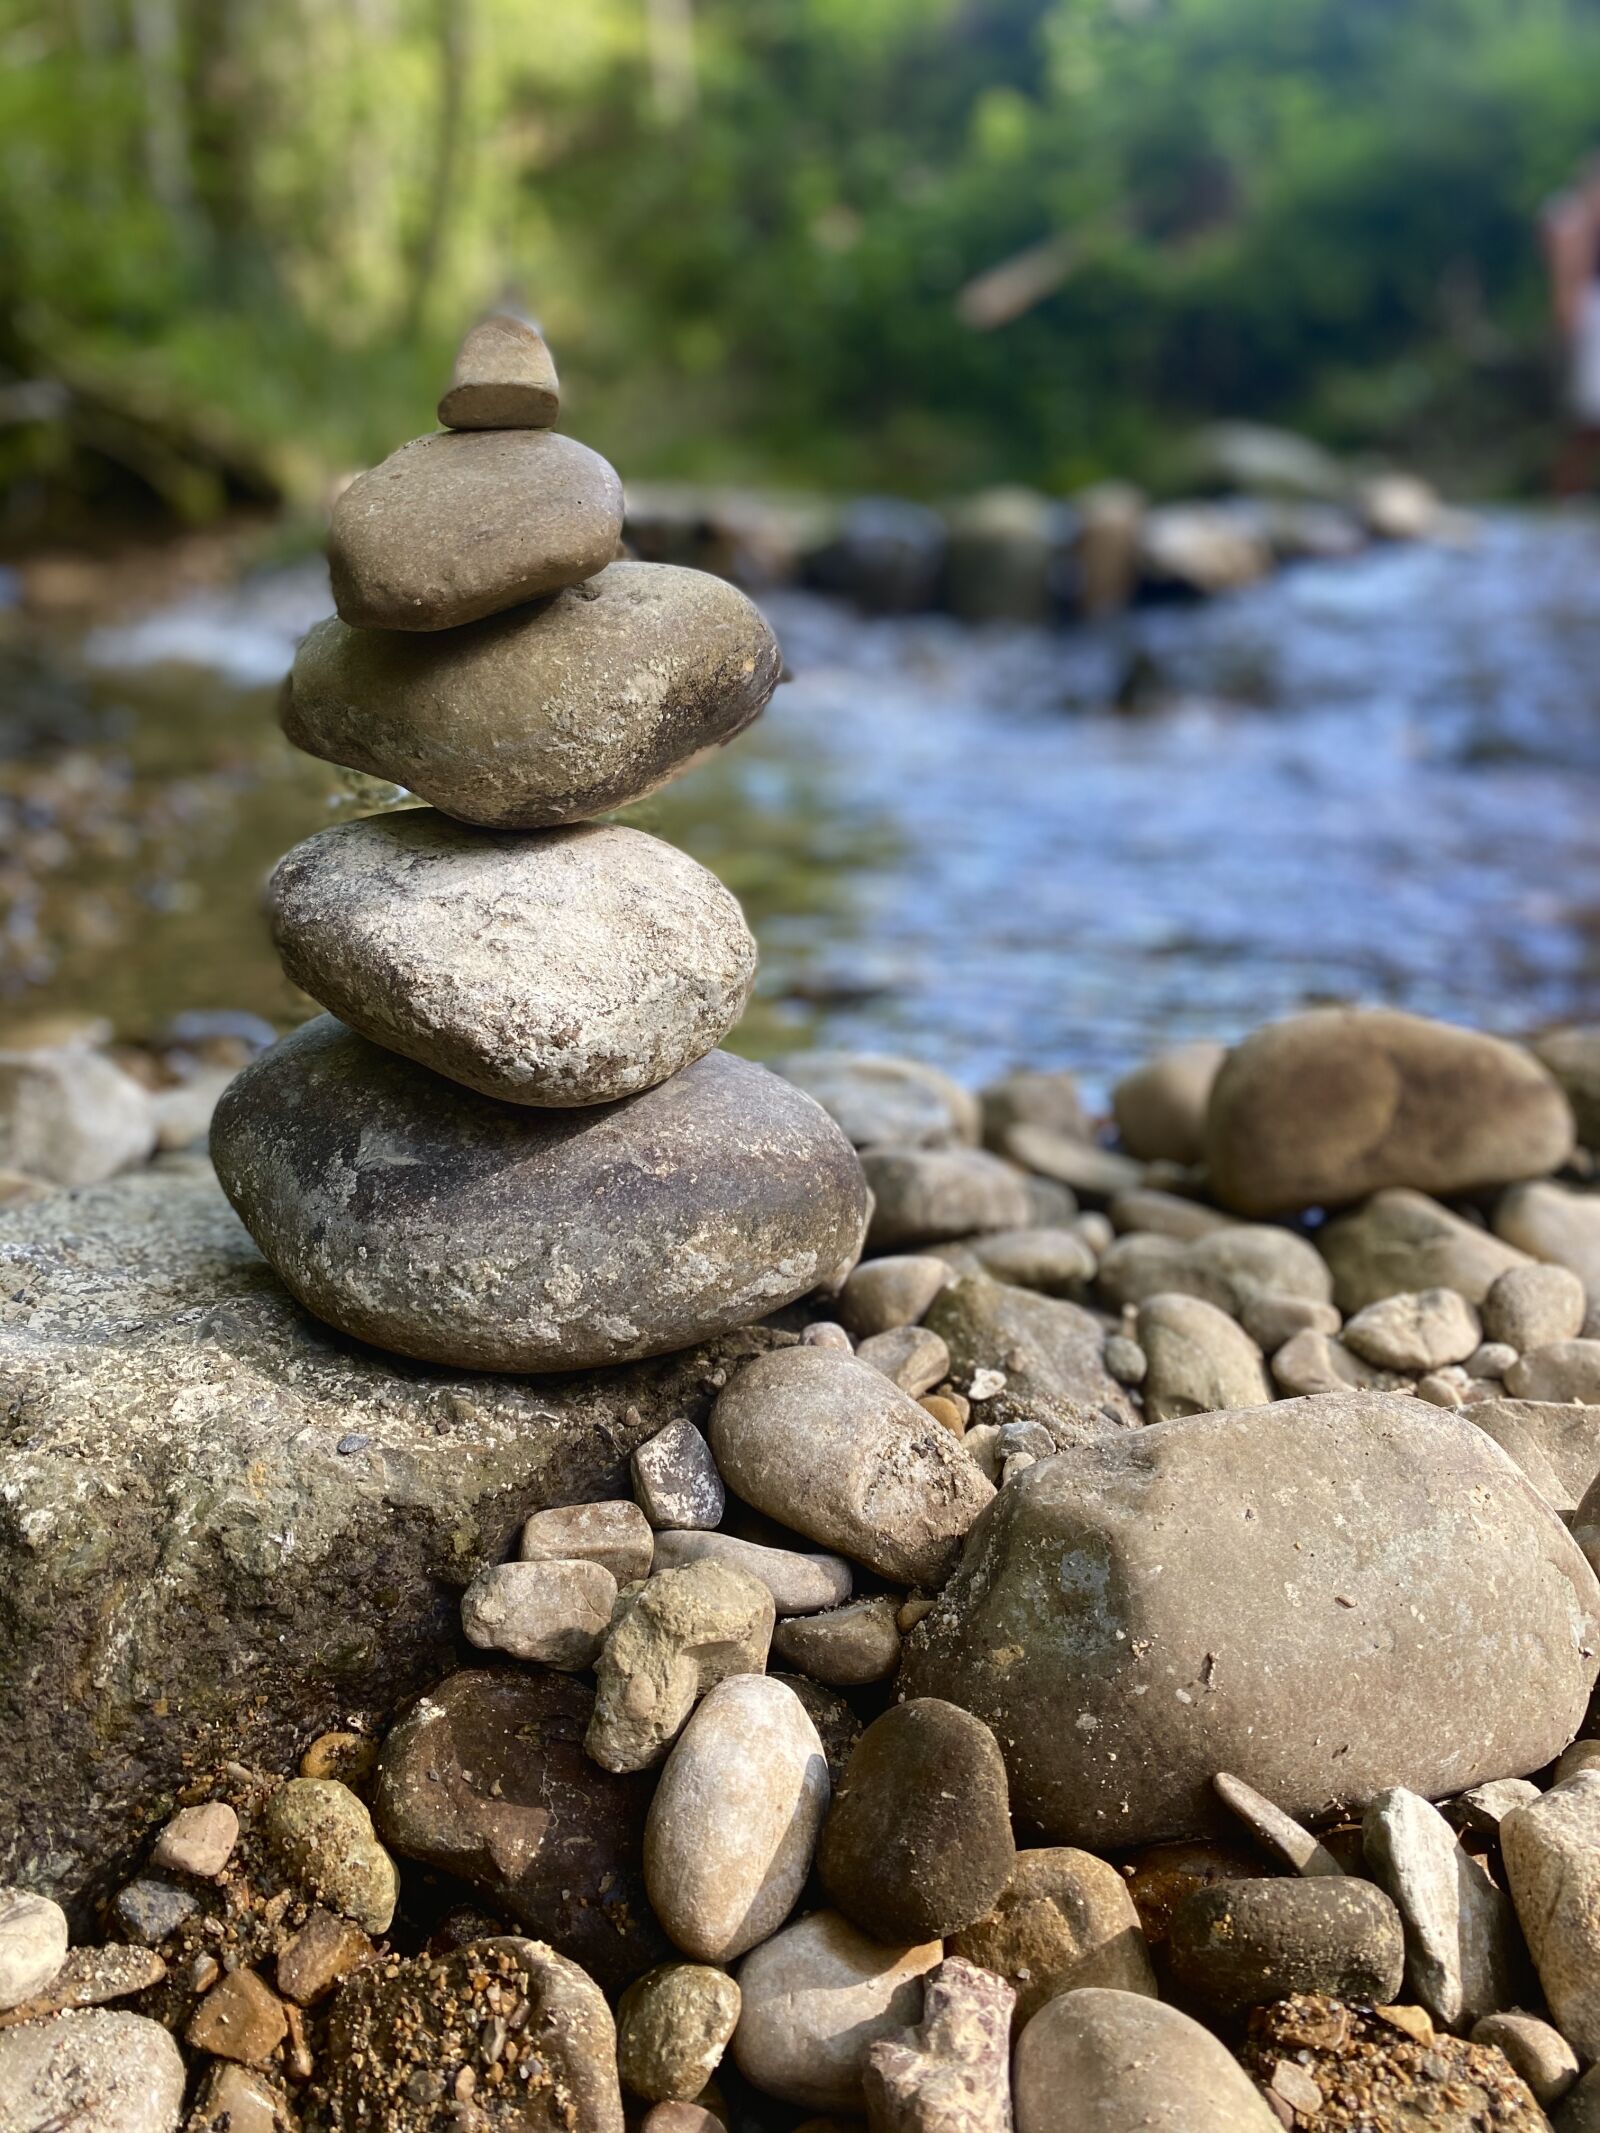 iPhone 11 back dual wide camera 4.25mm f/1.8 sample photo. Stones, art, nature photography